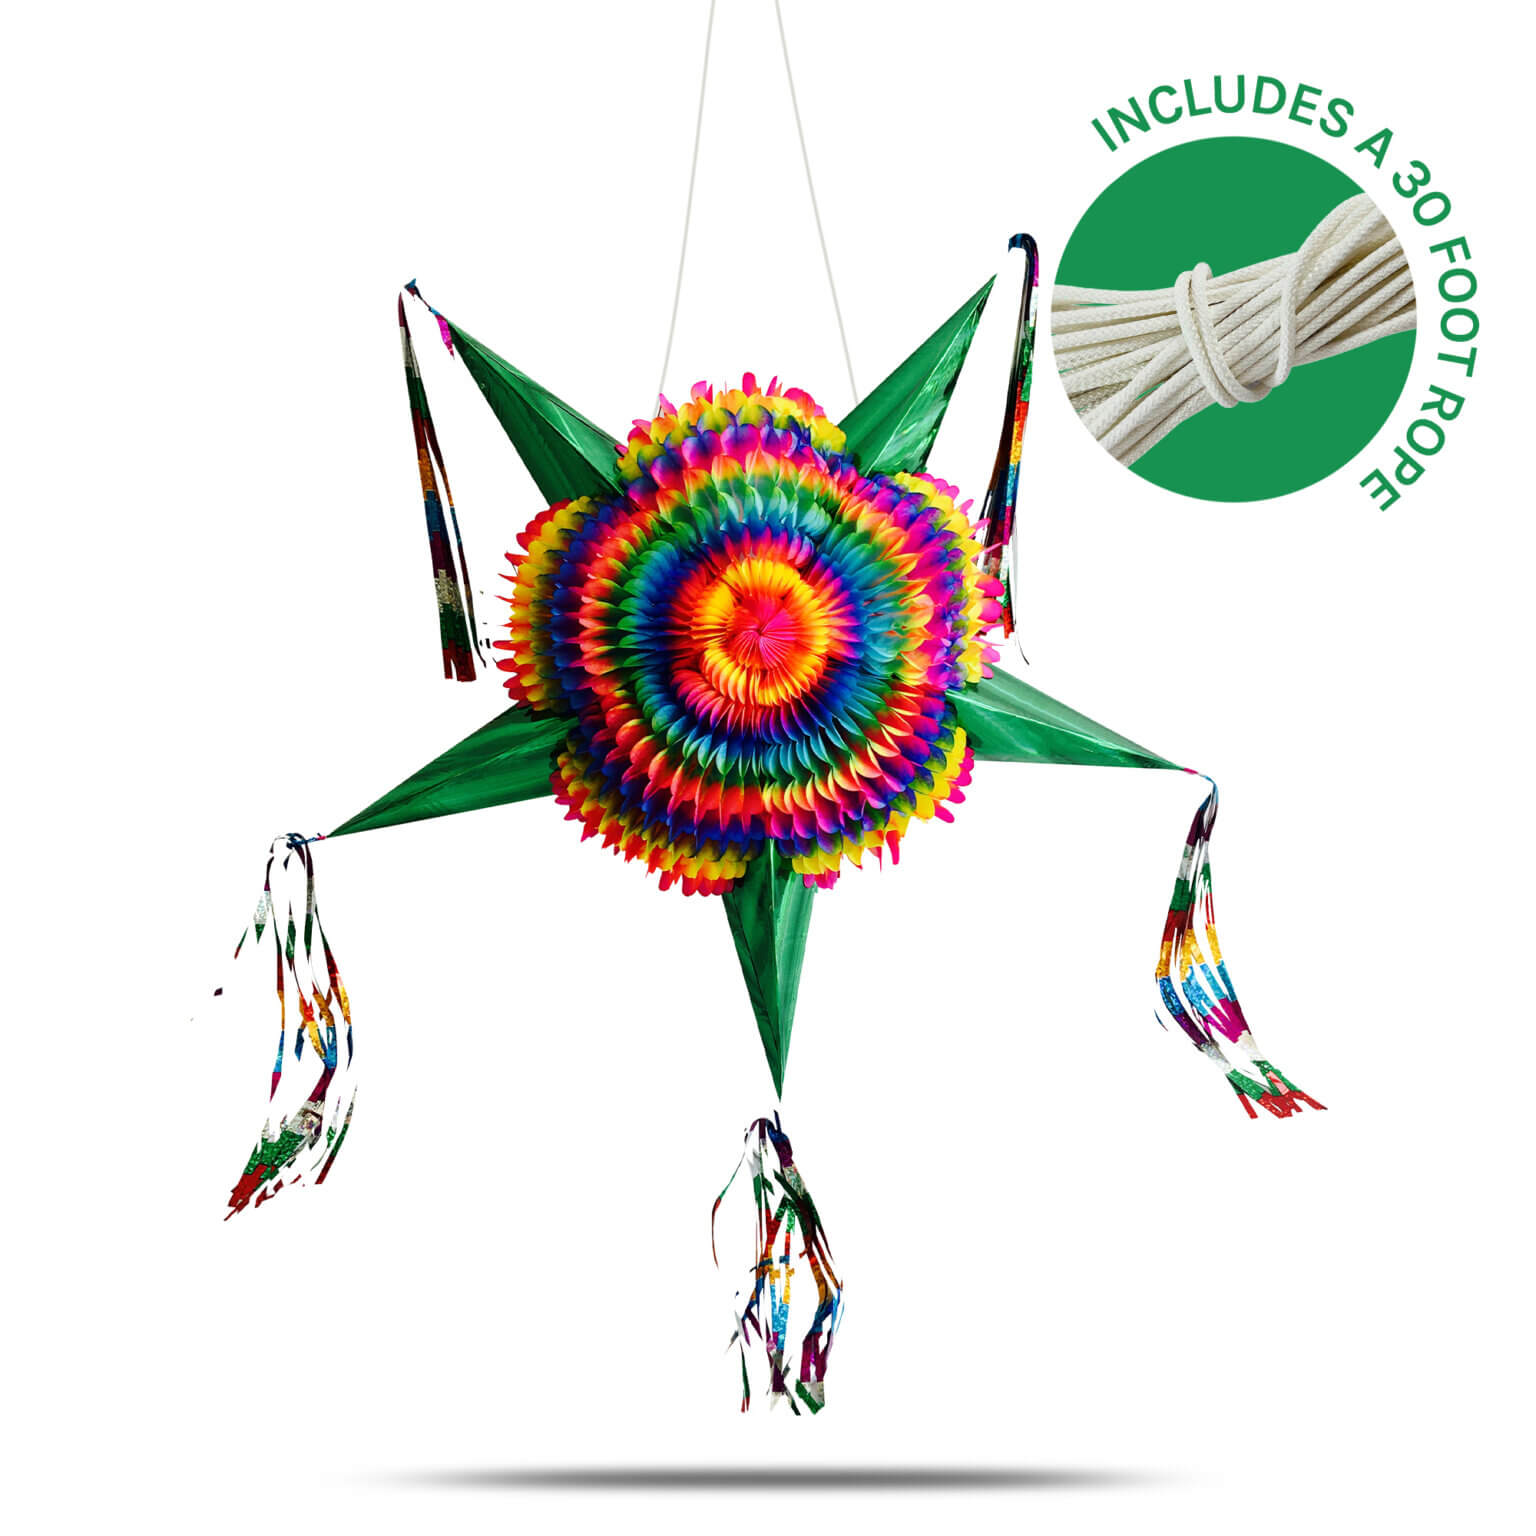 Extra Large Mexican Star Piñata With Green Cones And 30 Ft Rope Included Holds 3 Pounds Of 4360